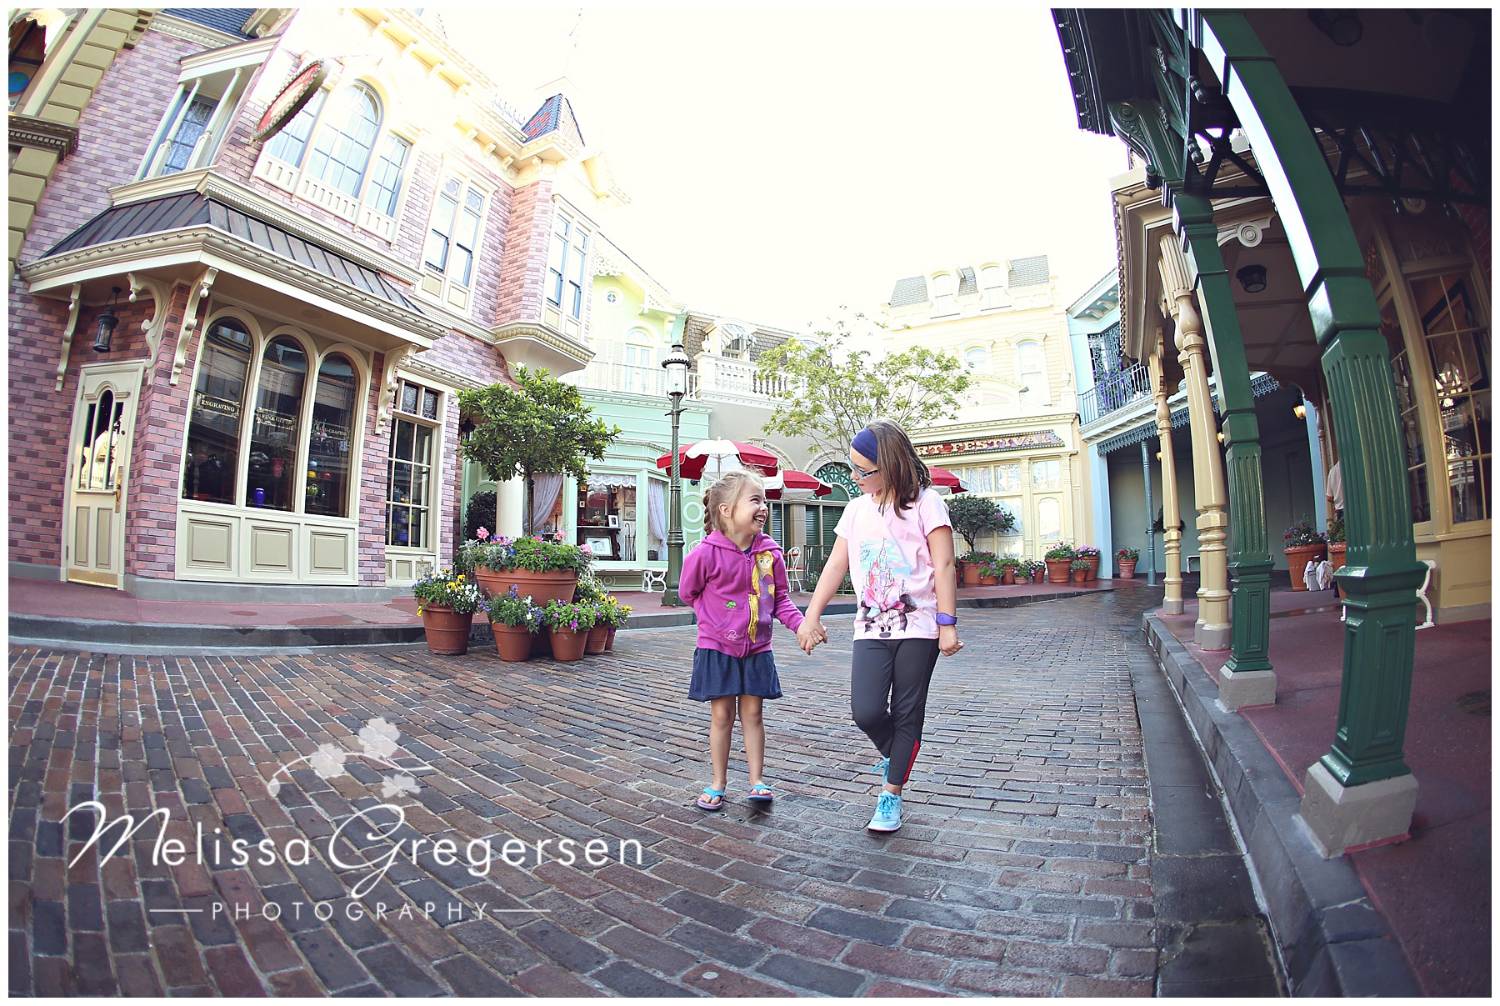 Fun tips on how to take better vacation photos! - Gregersen Photography